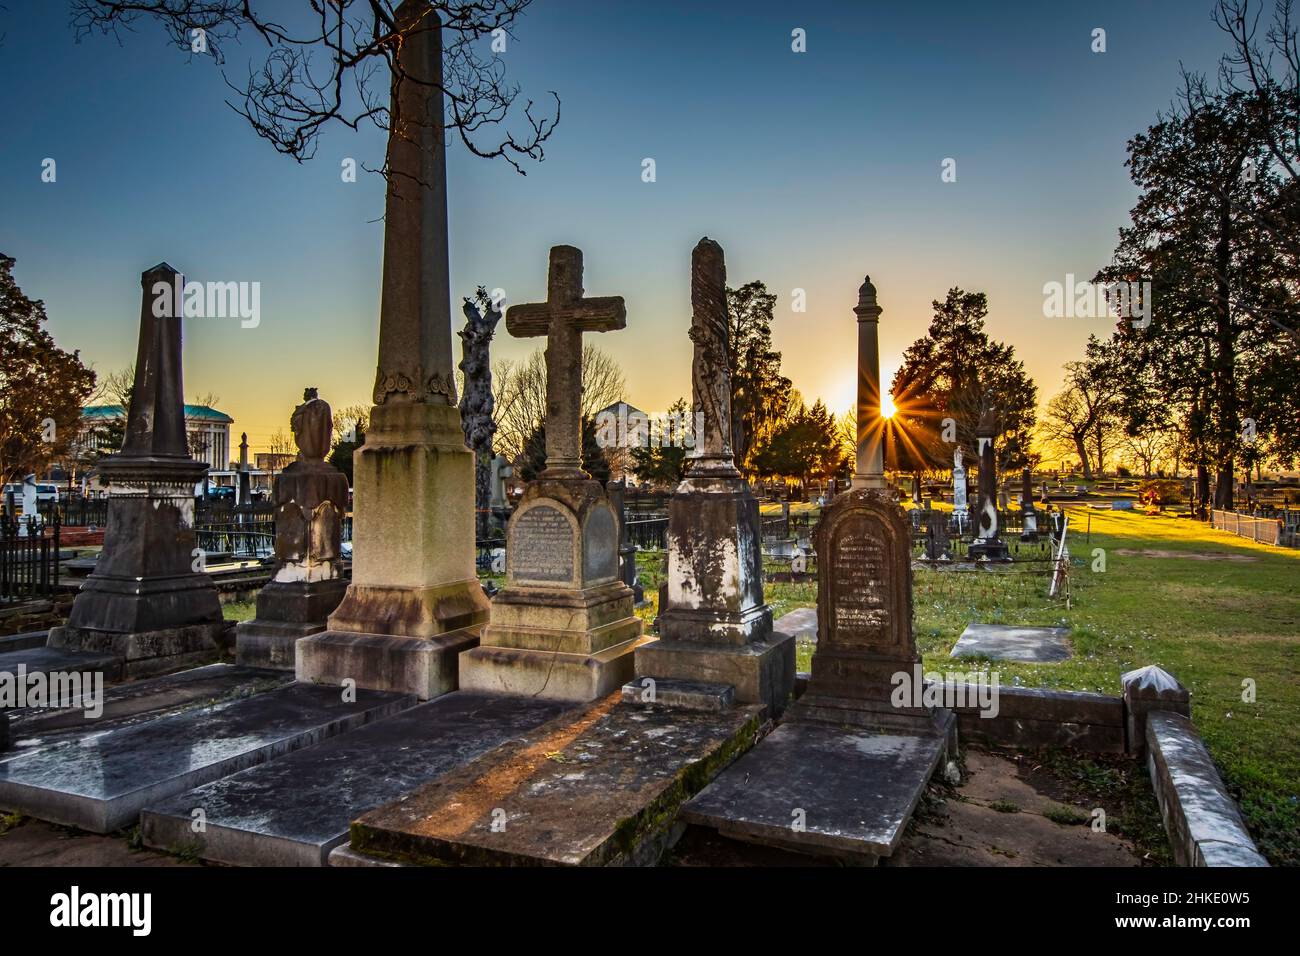 Montgomery, Alabama, USA-March 3, 2021: Old ornate gravestones in historic Old Oakwood Cemetery established in 1818. Many soldiers and prominent peopl Stock Photo